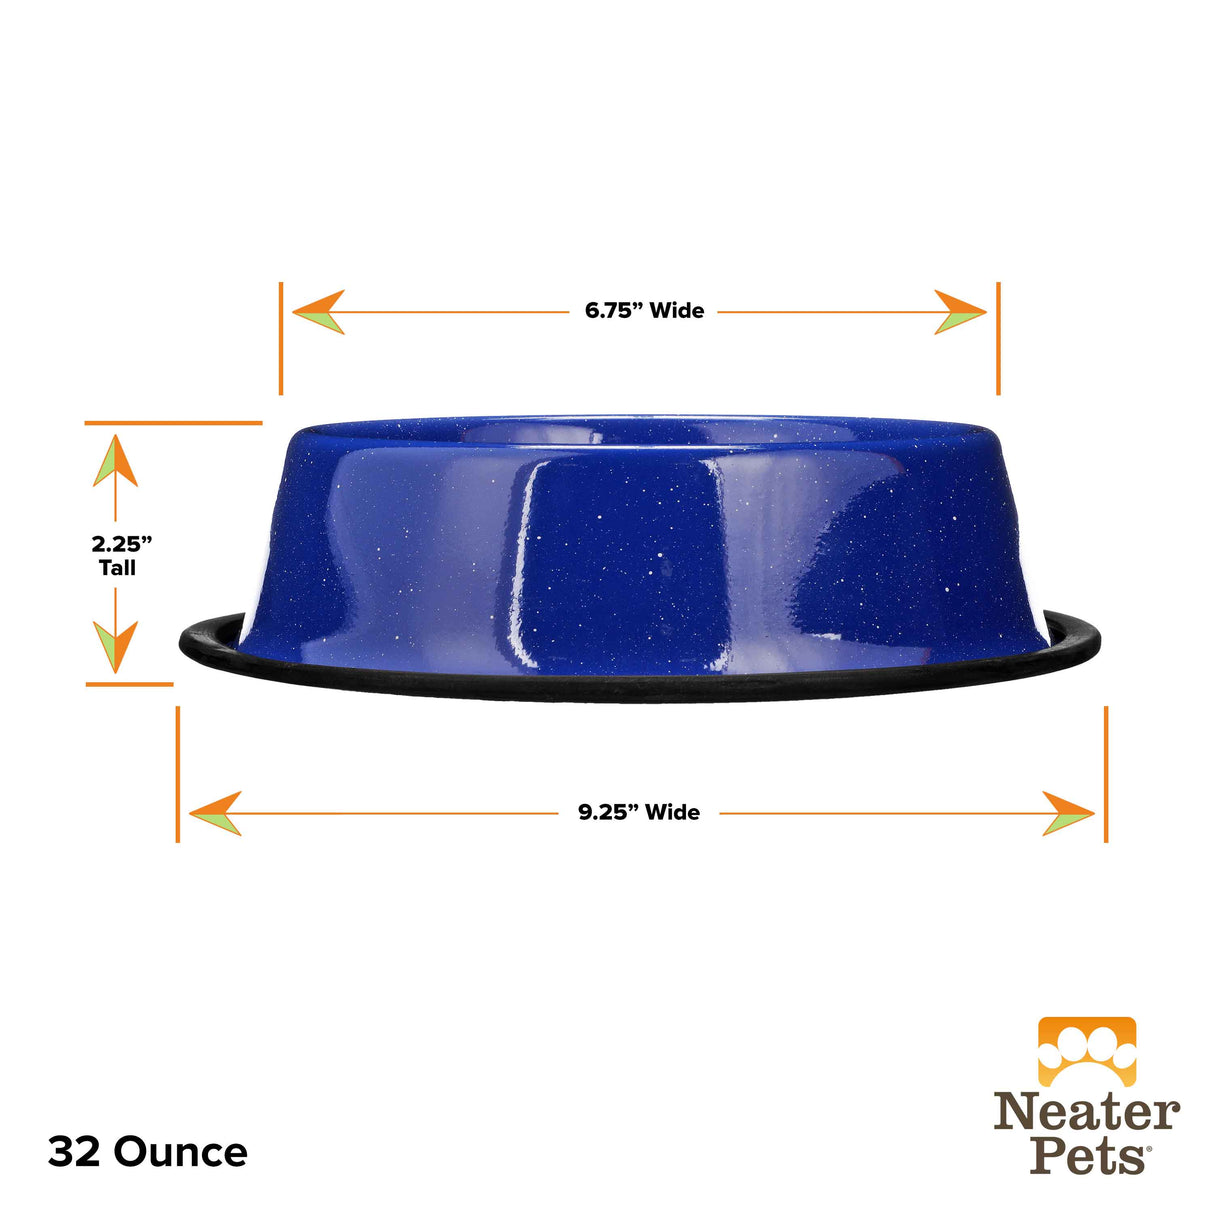 32 ounce Blue Camping Bowl sizing guide.